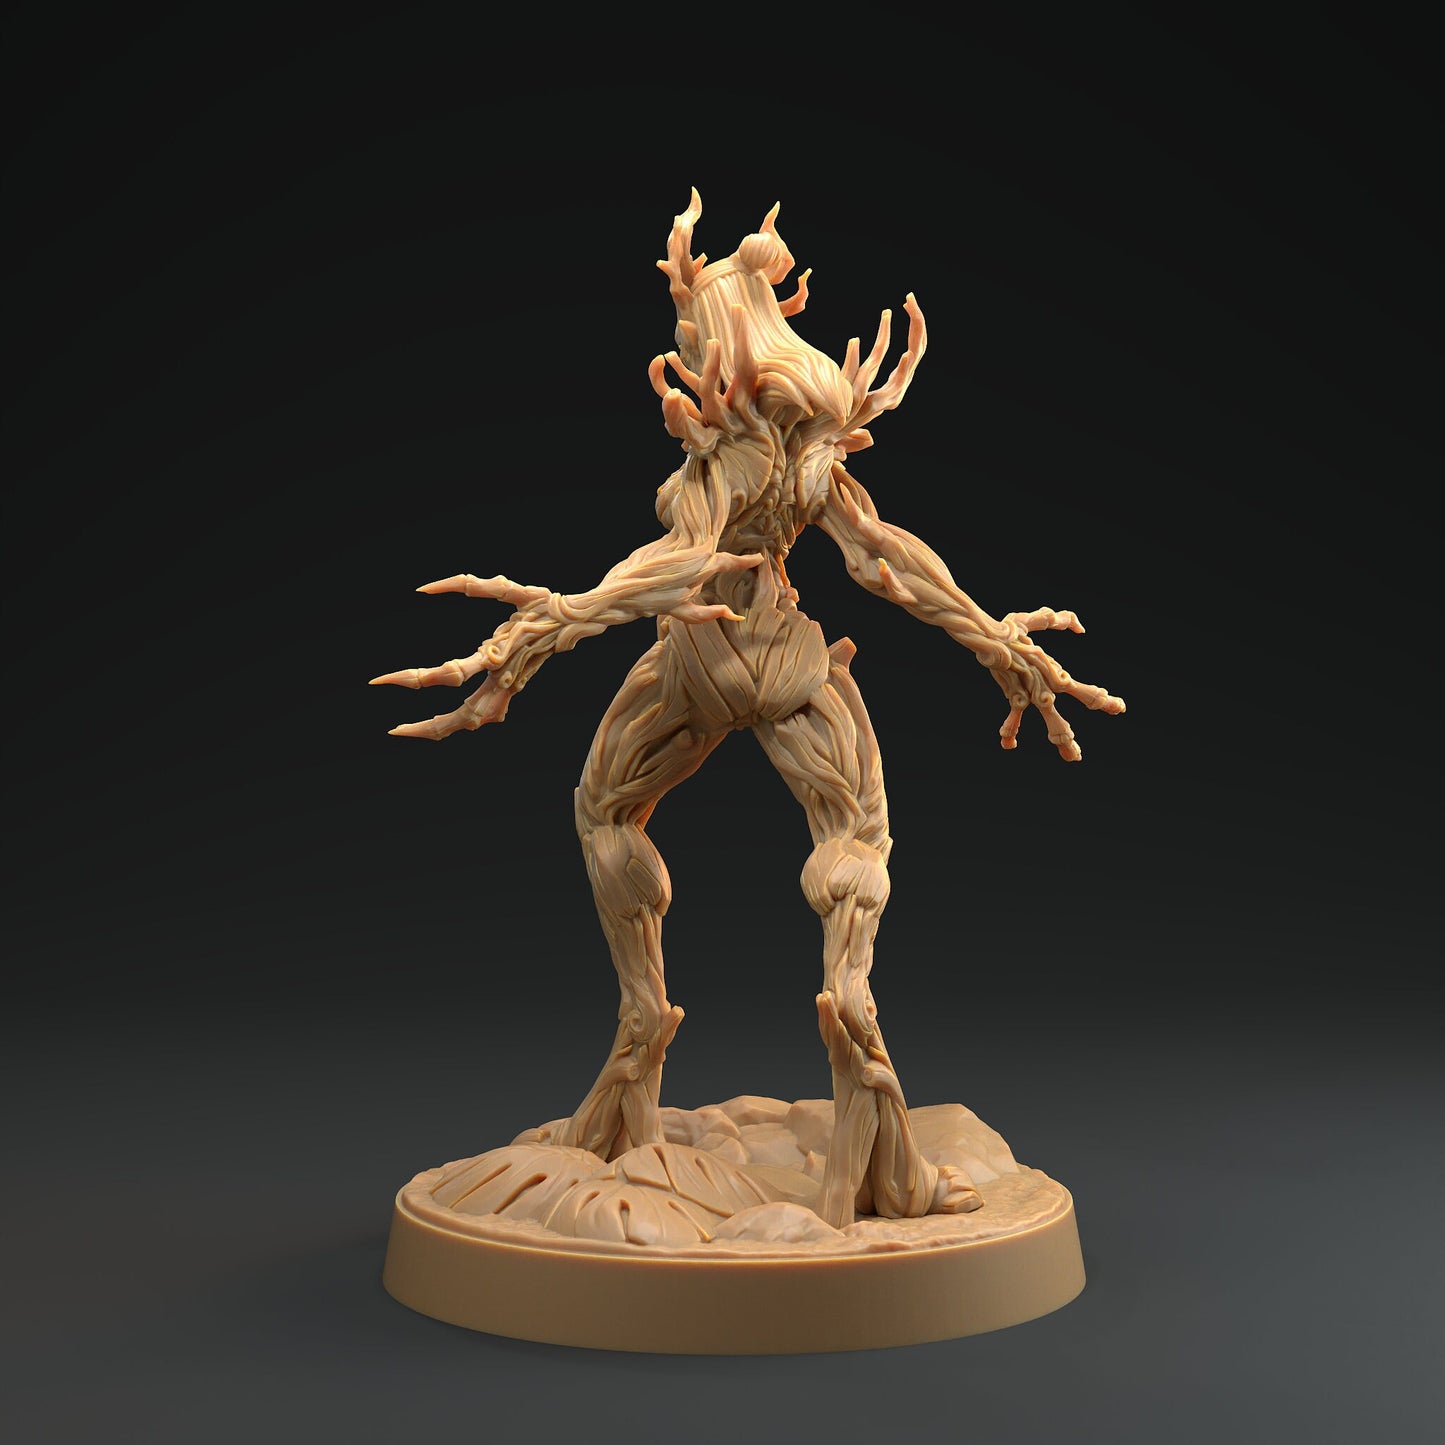 Dryads | RPG Miniature for Dungeons and Dragons|Pathfinder|Tabletop Wargaming | Fey Miniature | Dragon Trappers Lodge